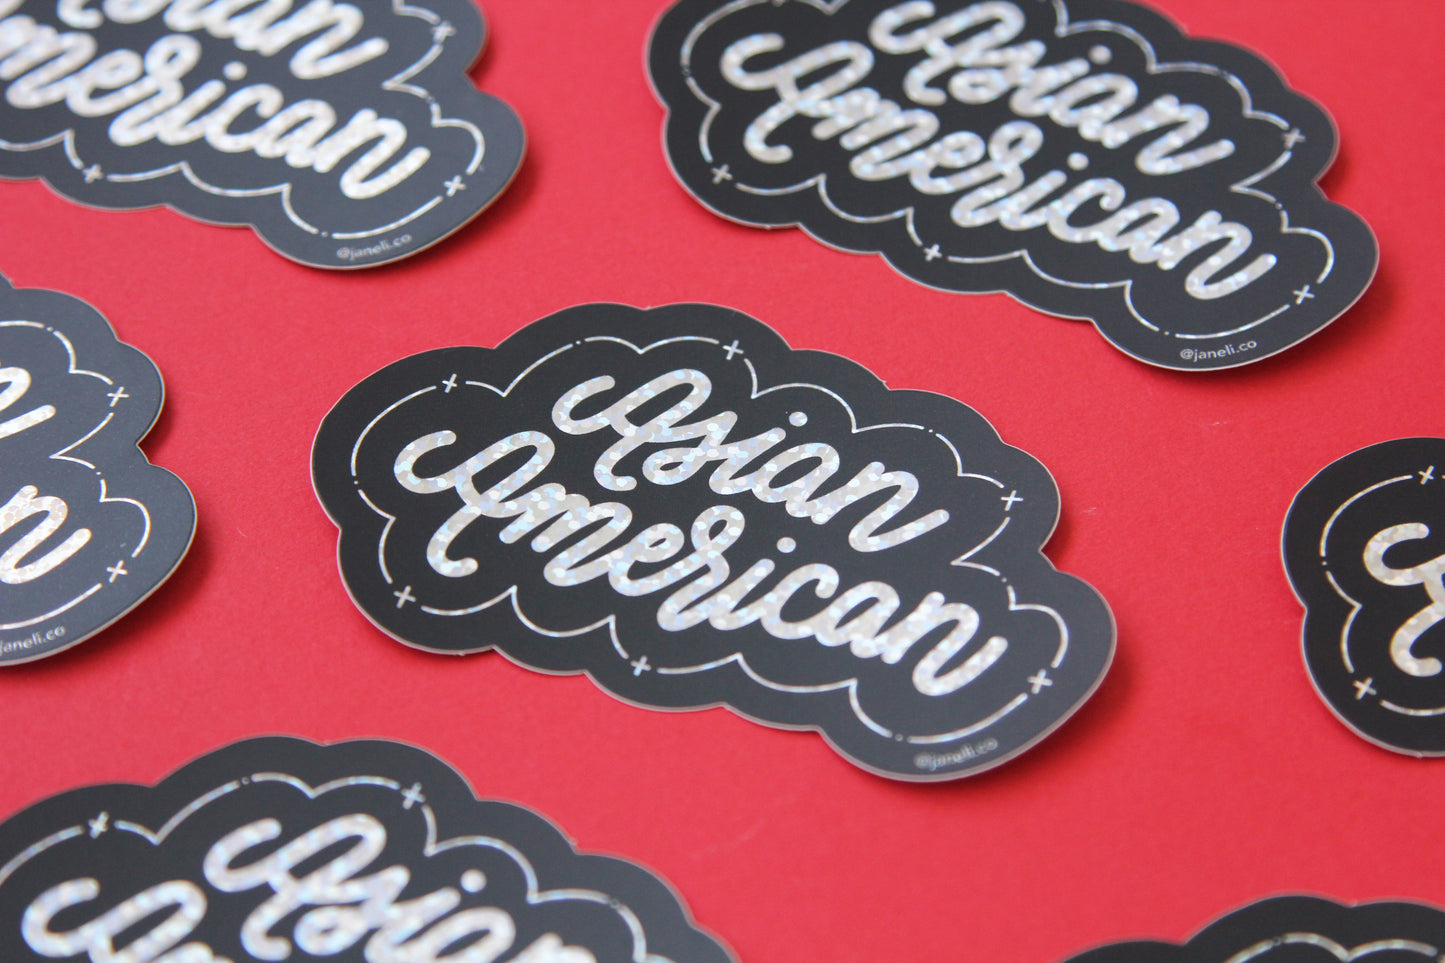 A grid of black and metallic glitter JaneLi.Co stickers that say "Asian American" in cursive lettering over a red background.